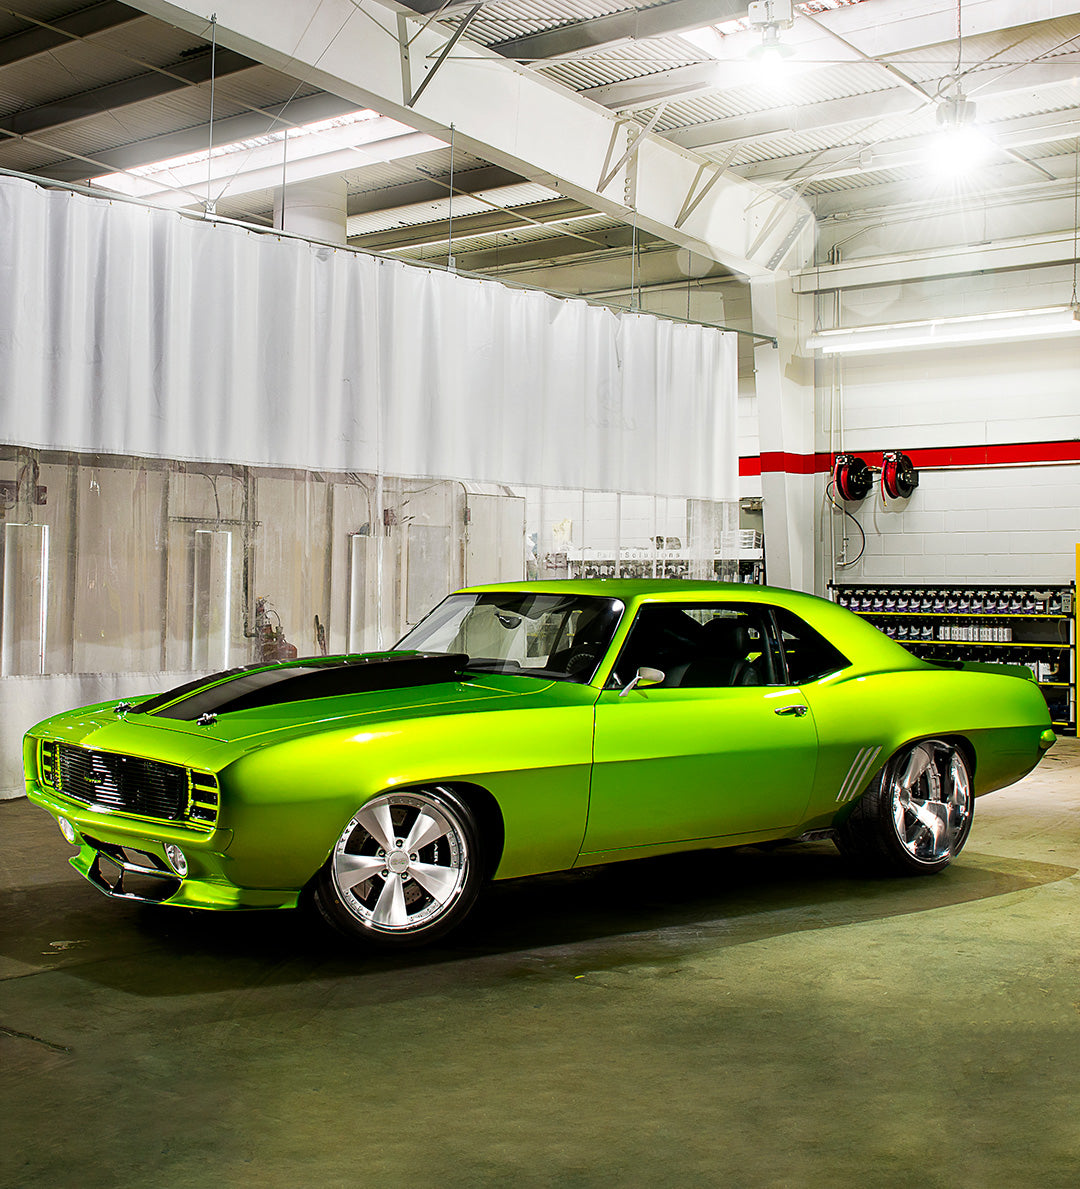 A lime green muscle car parked in a garage.